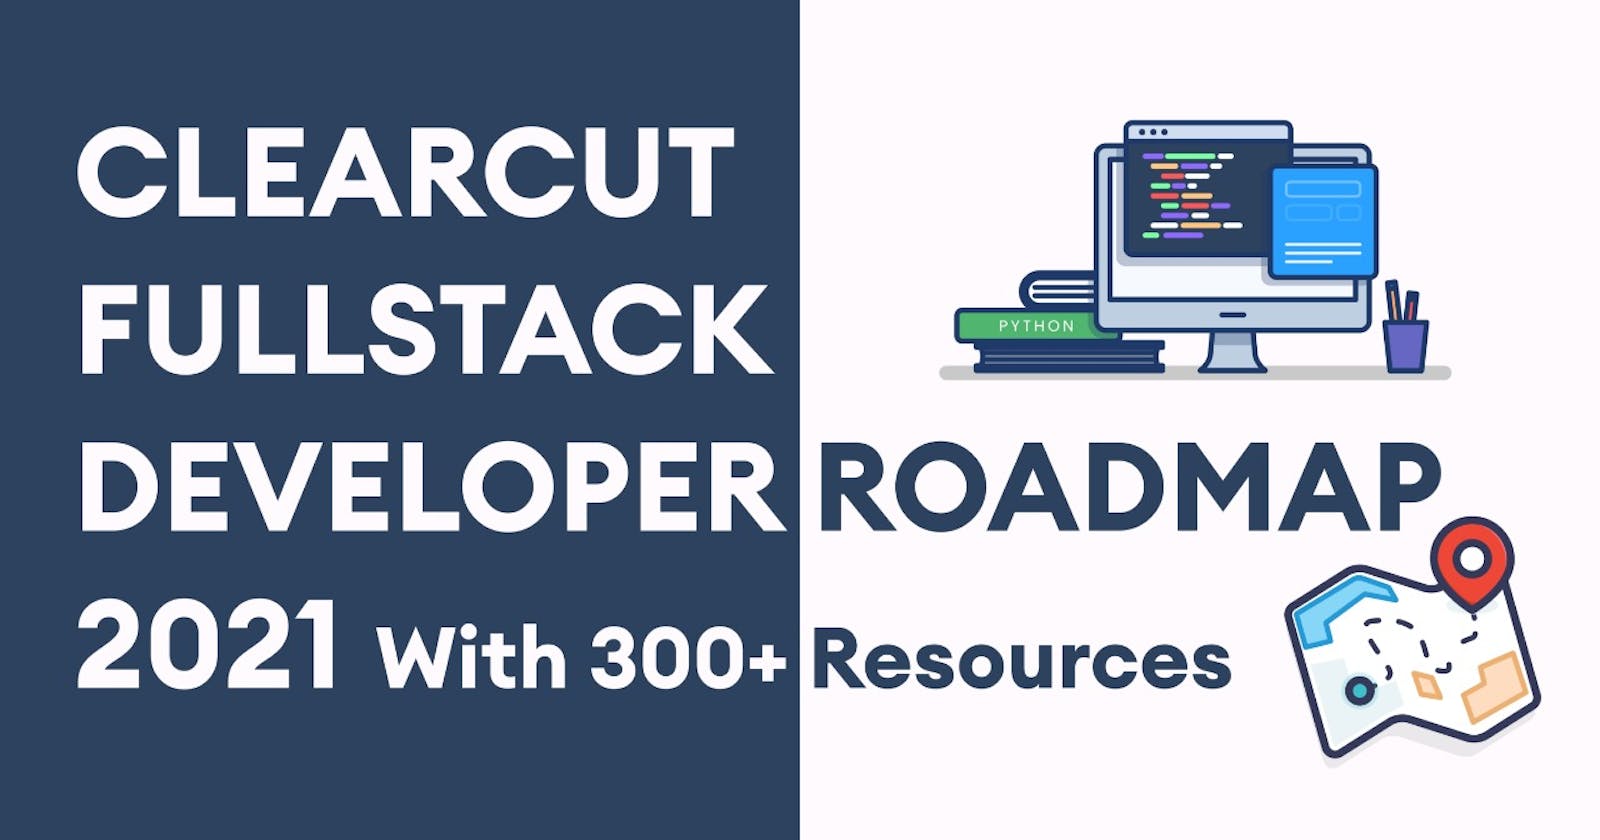 ClearCut Fullstack Developer Roadmap 2021 with 300+ Resources 🤩🚀